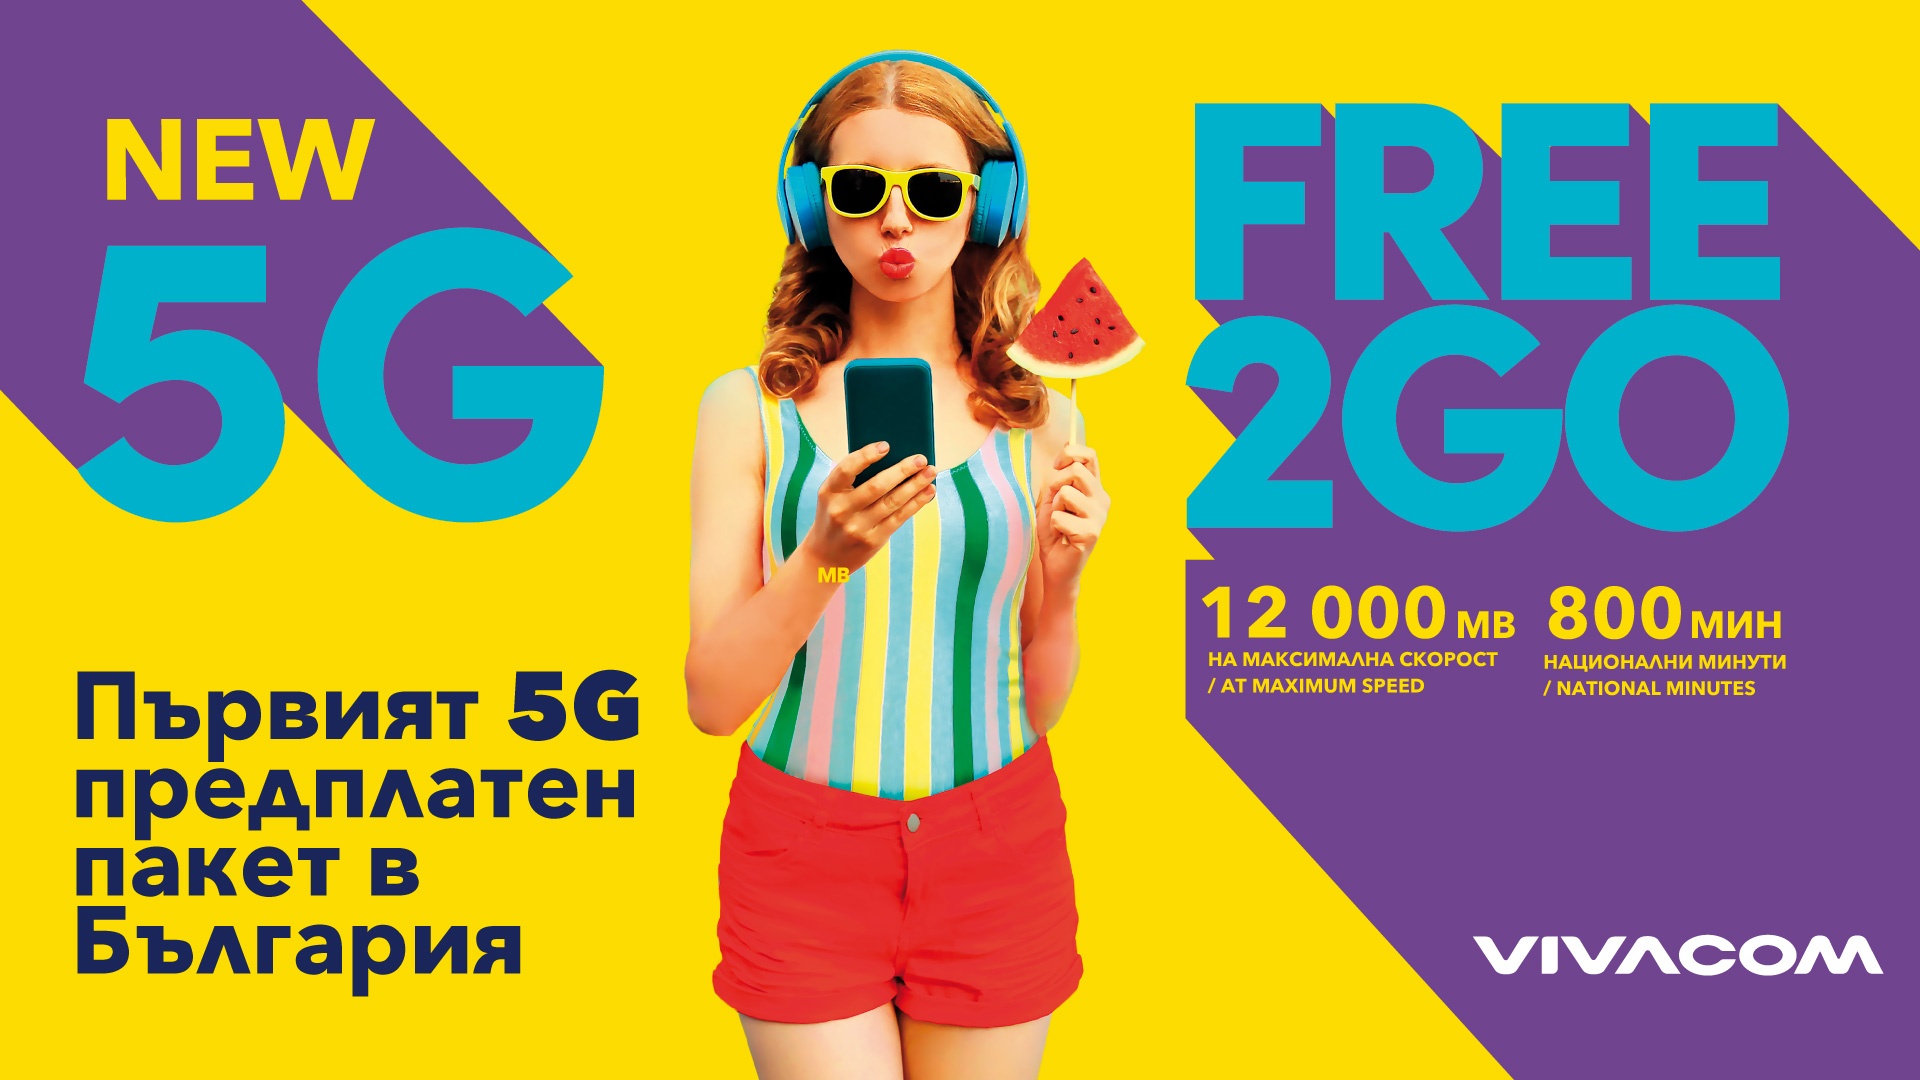 Vivacom launching the first Free2Go 5G prepaid package in Bulgaria